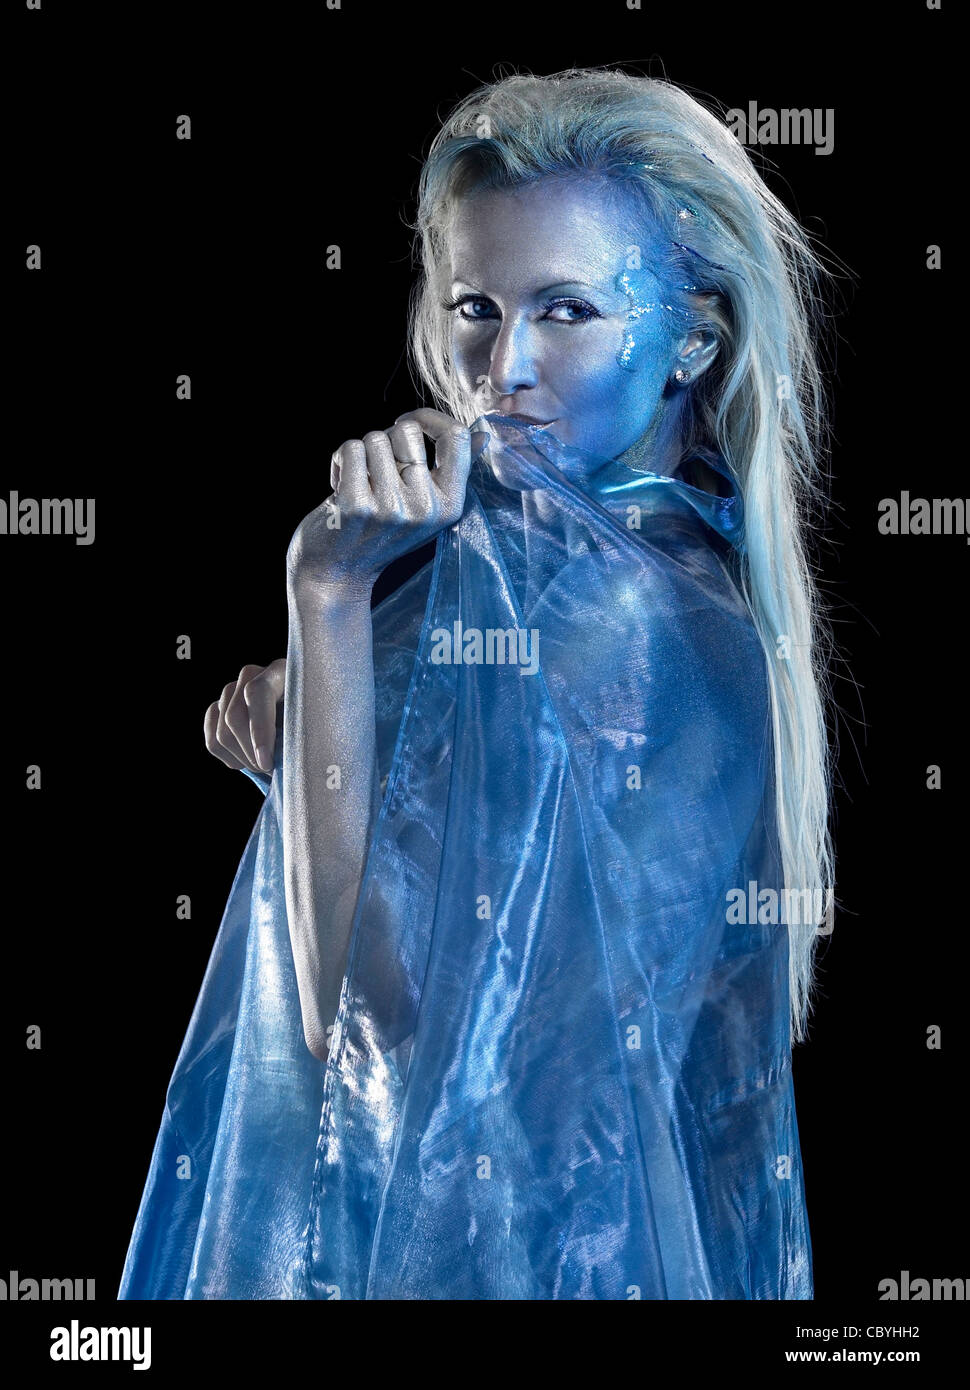 mystic mermaid theme showing a blond bodypainted woman coated with translucent blue fabrics, studio photography in black back Stock Photo